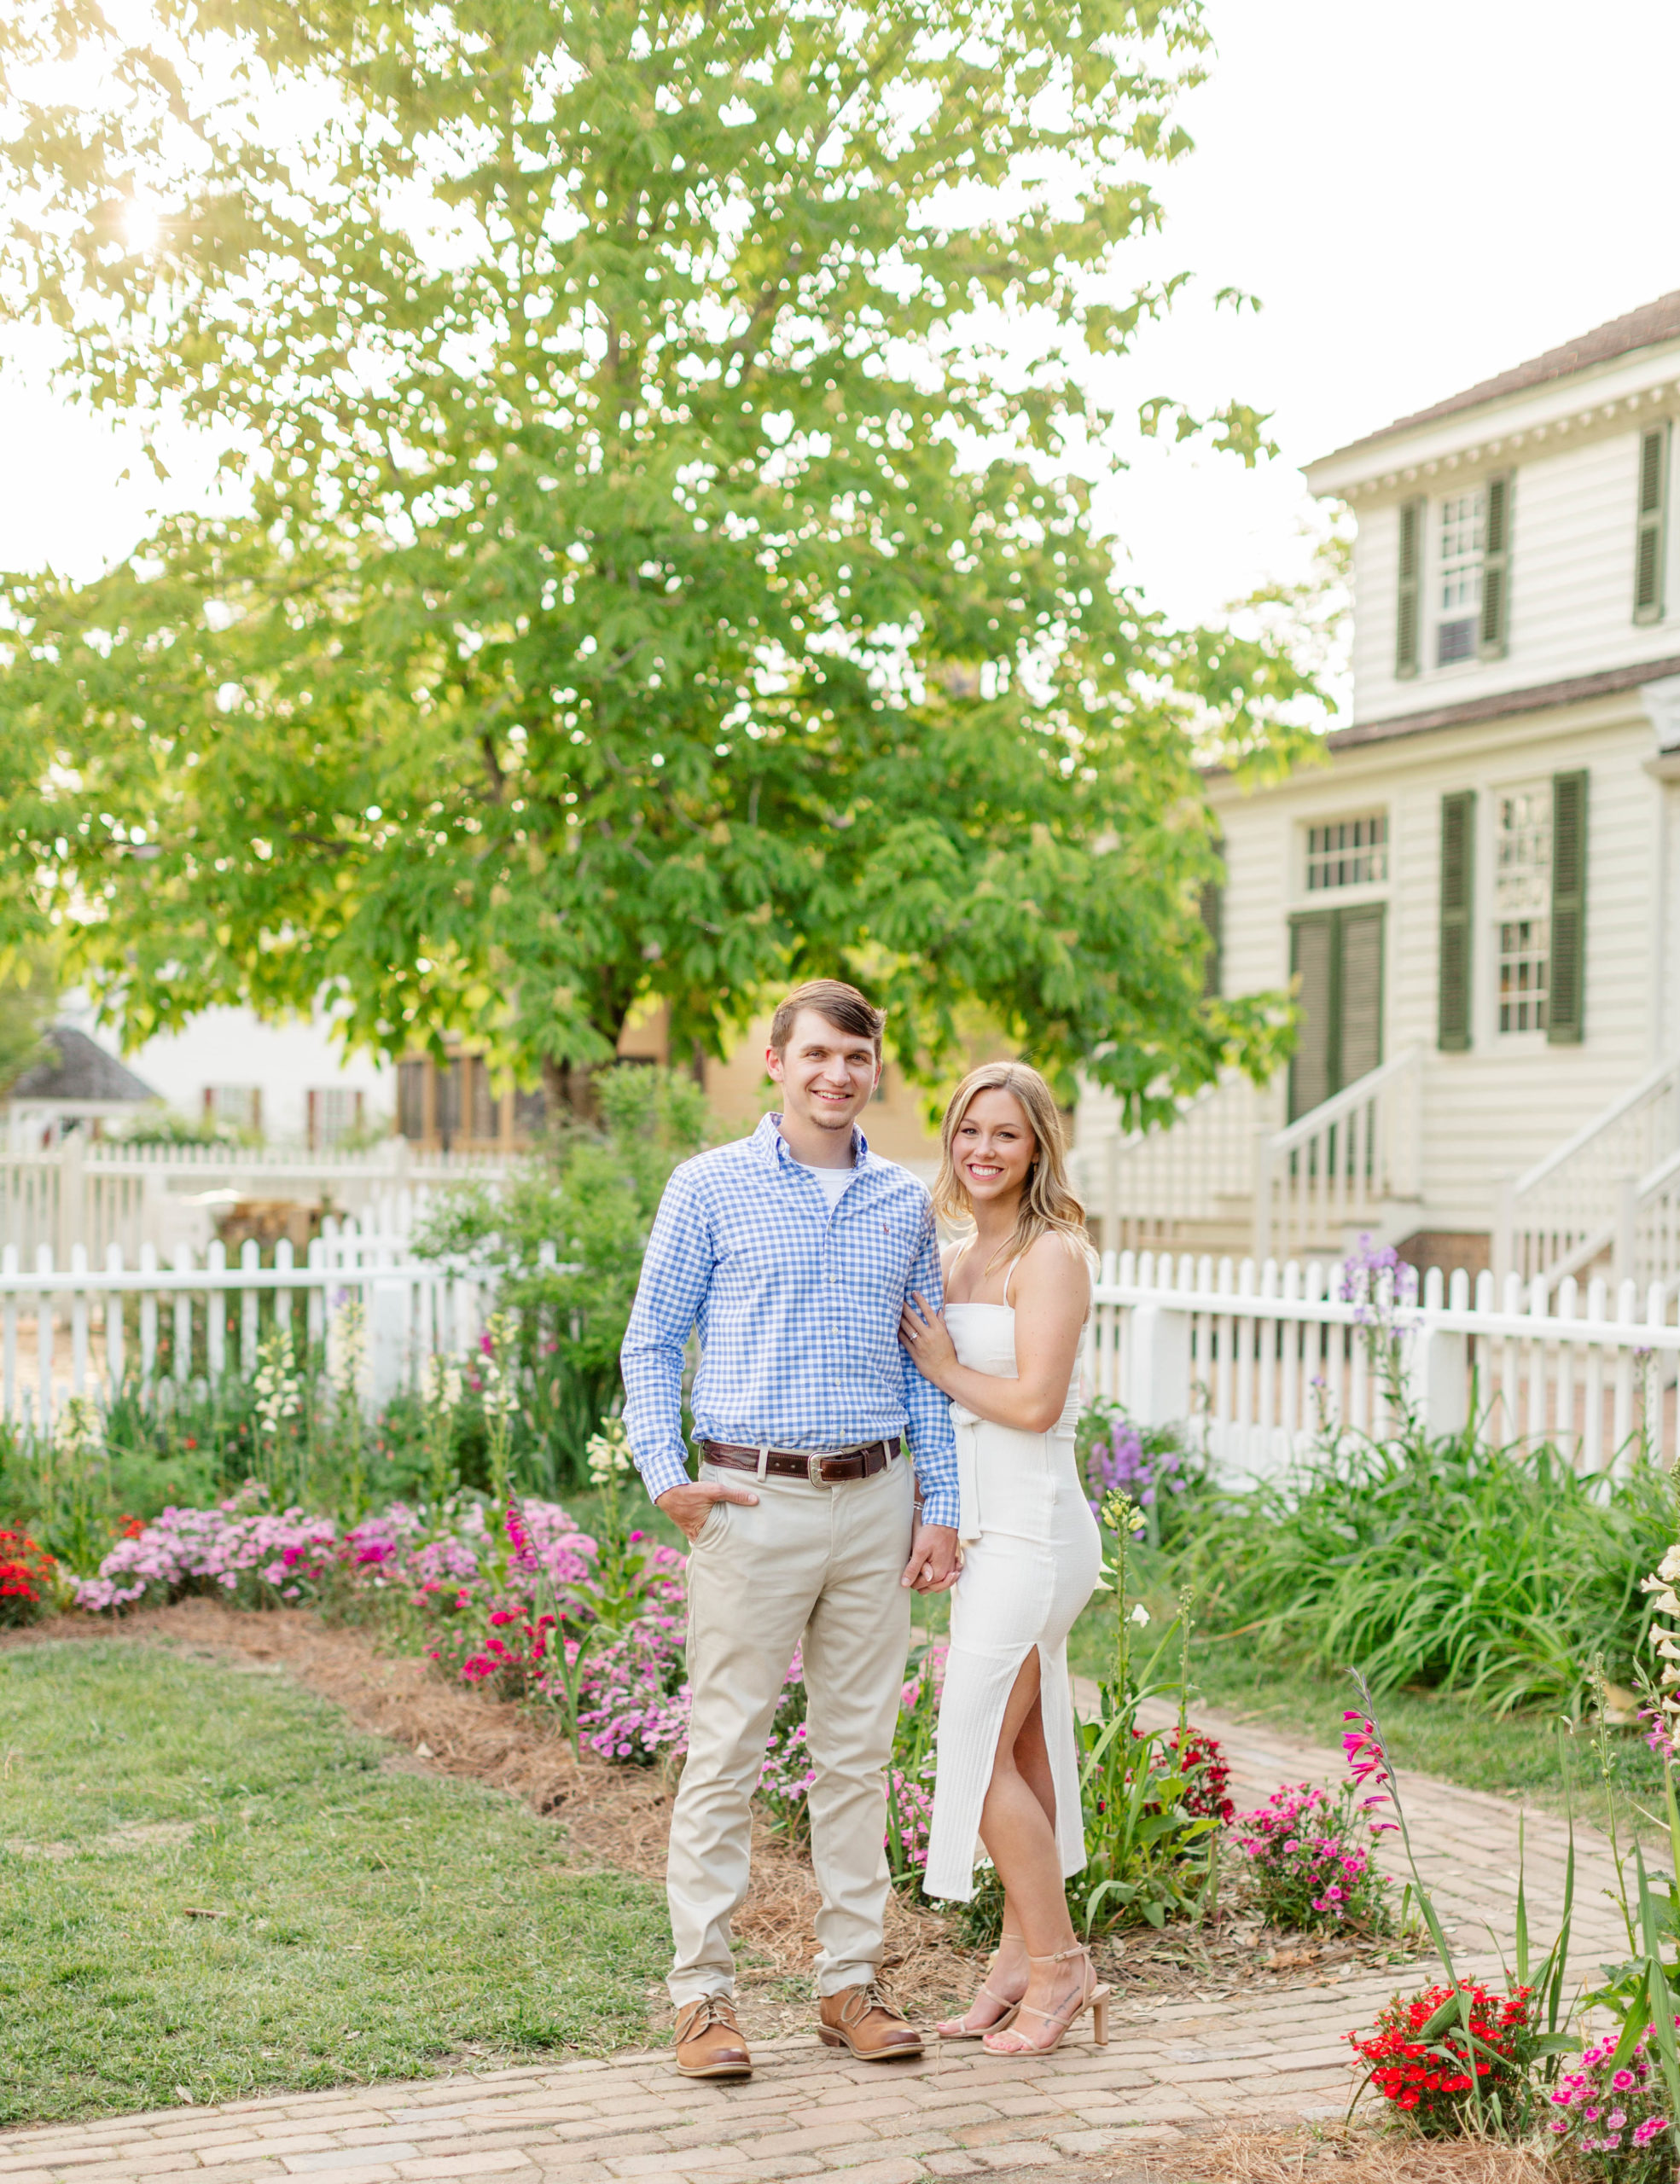 Hope and Payton’s Spring Colonial Williamsburg Engagement Session